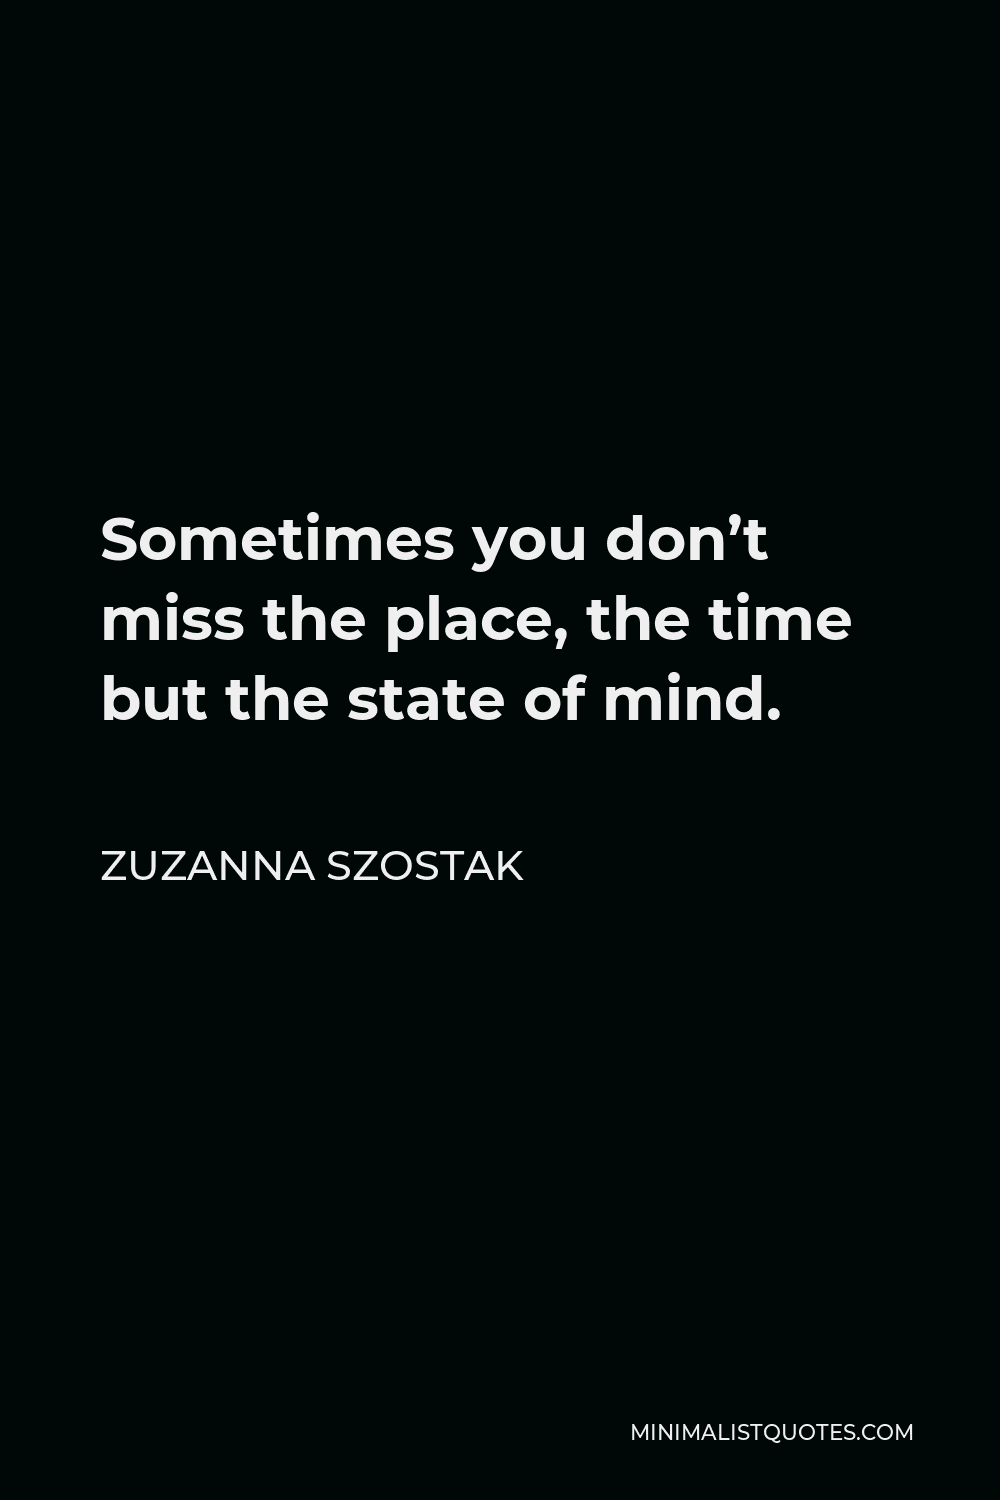 Zuzanna Szostak Quote - Sometimes you don’t miss the place, the time but the state of mind.